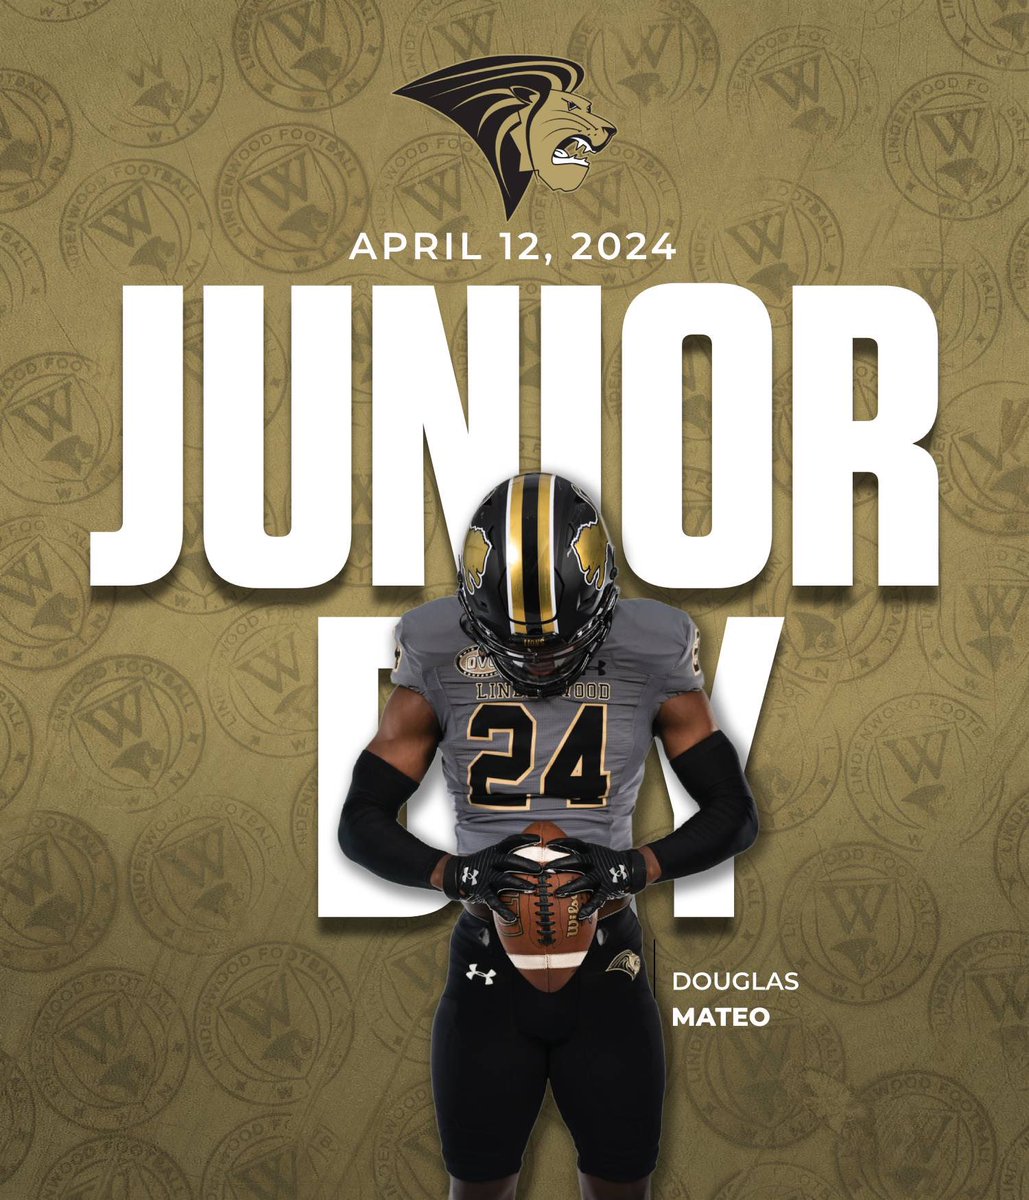 I will be at Lindenwood Friday. Cant wait to meet the coaches and see the facilities!! @coachgarcia57 @stugfb @EricInama @_CoachGoose @LindenwoodFB @MontiniFootball @EDGYTIM @DeepDishFB